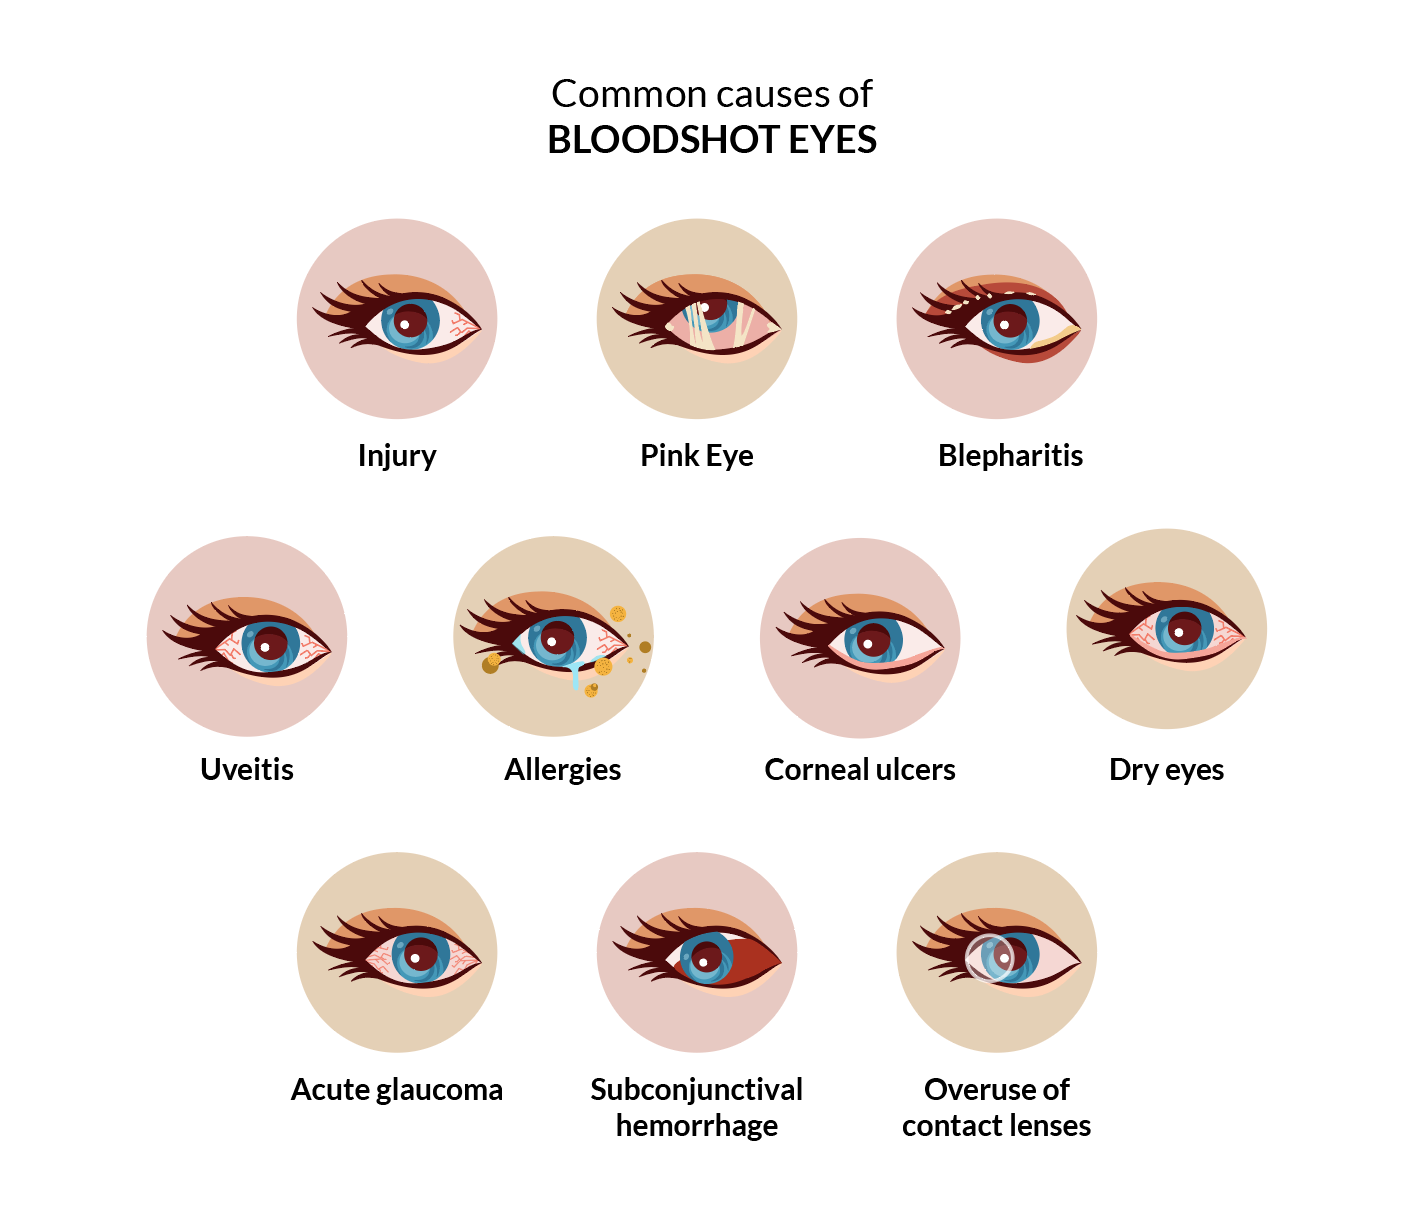 What Are The Common Causes Of Eye Redness?